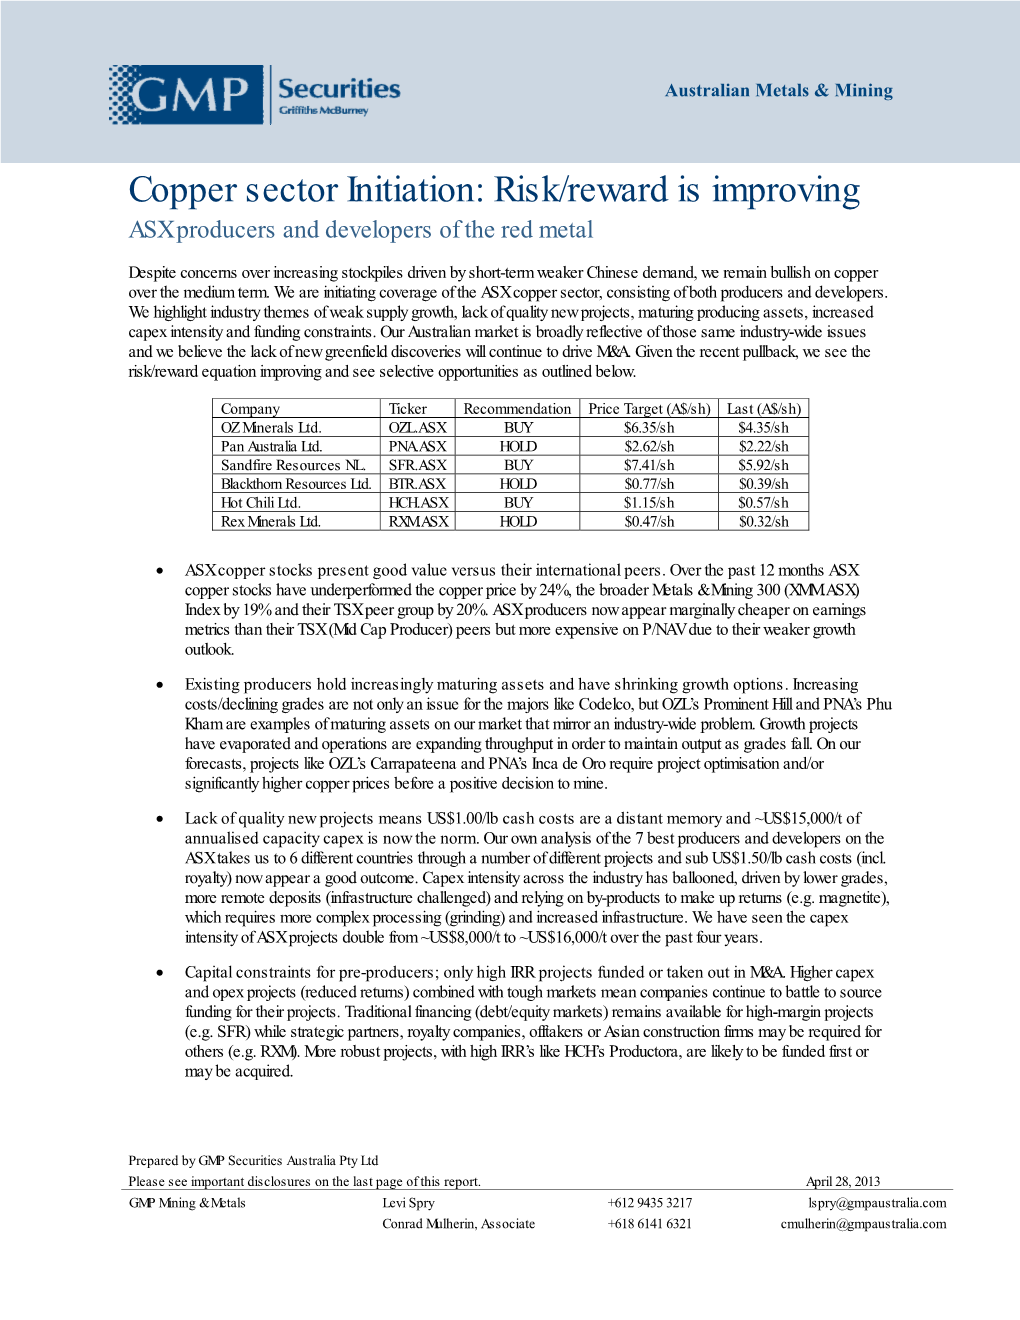 Copper Sector Initiation: Risk/Reward Is Improving ASX Producers and Developers of the Red Metal